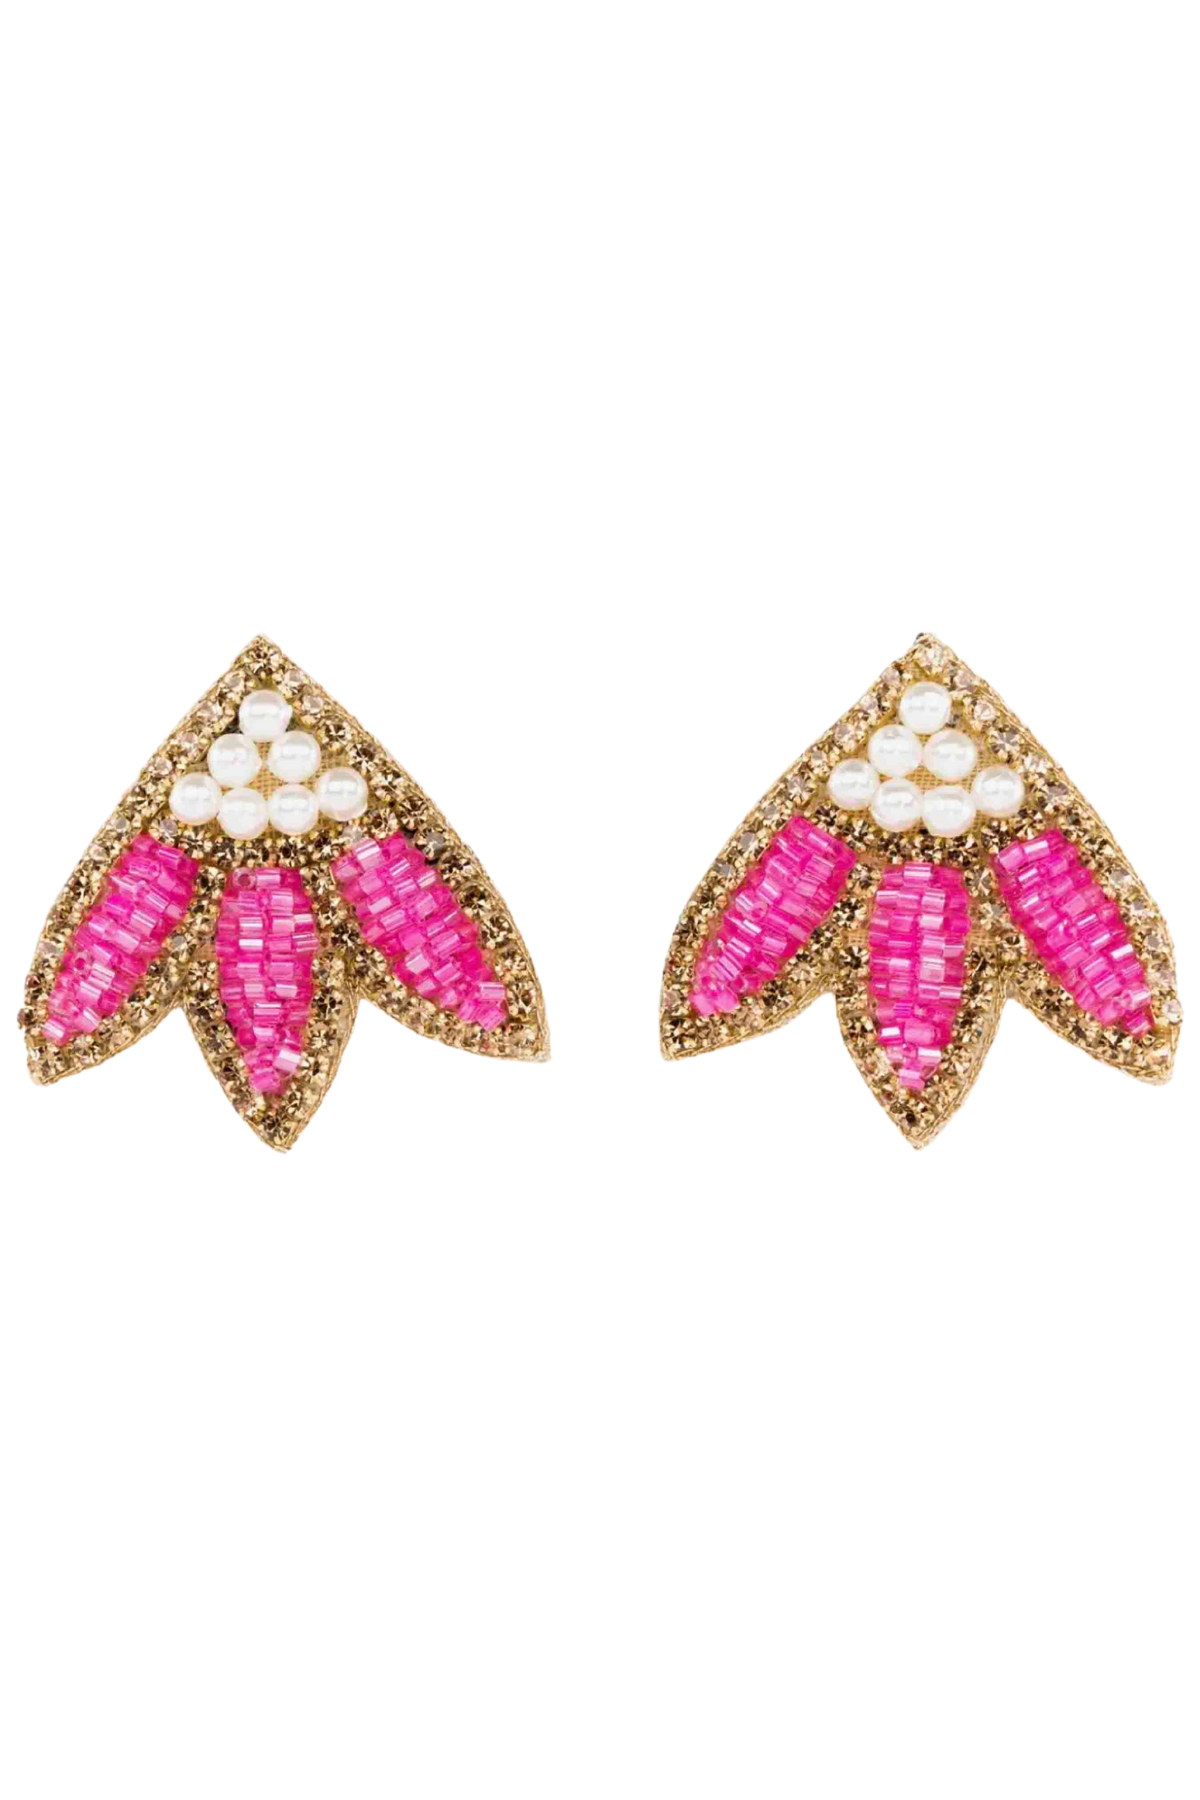 Pink Calypso Stud Earrings by Beth Ladd Collections